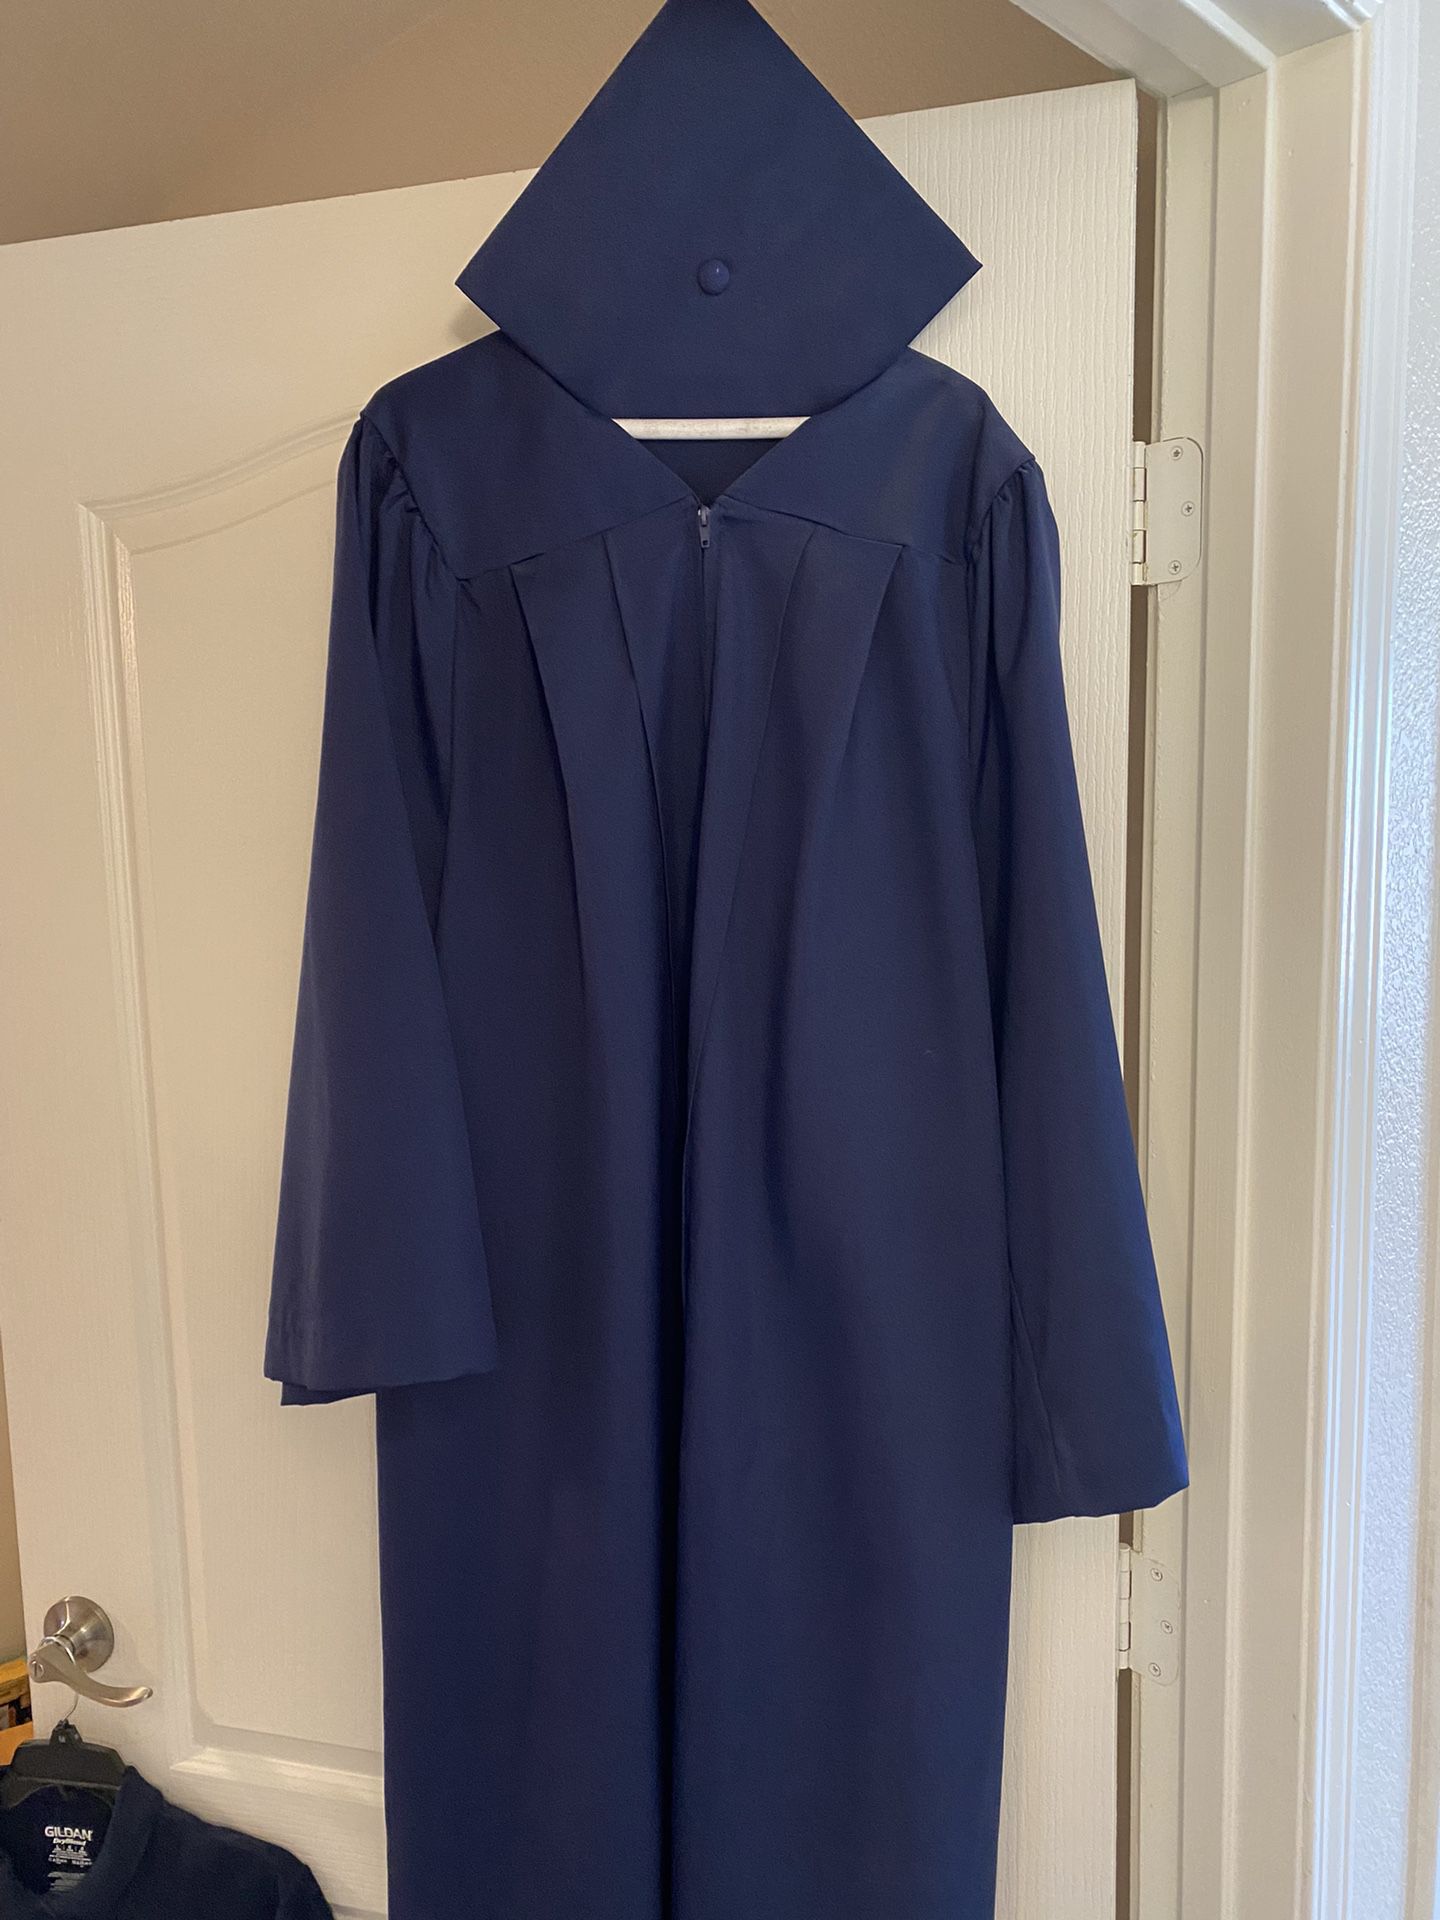 Navy Graduation Cap And Gown 